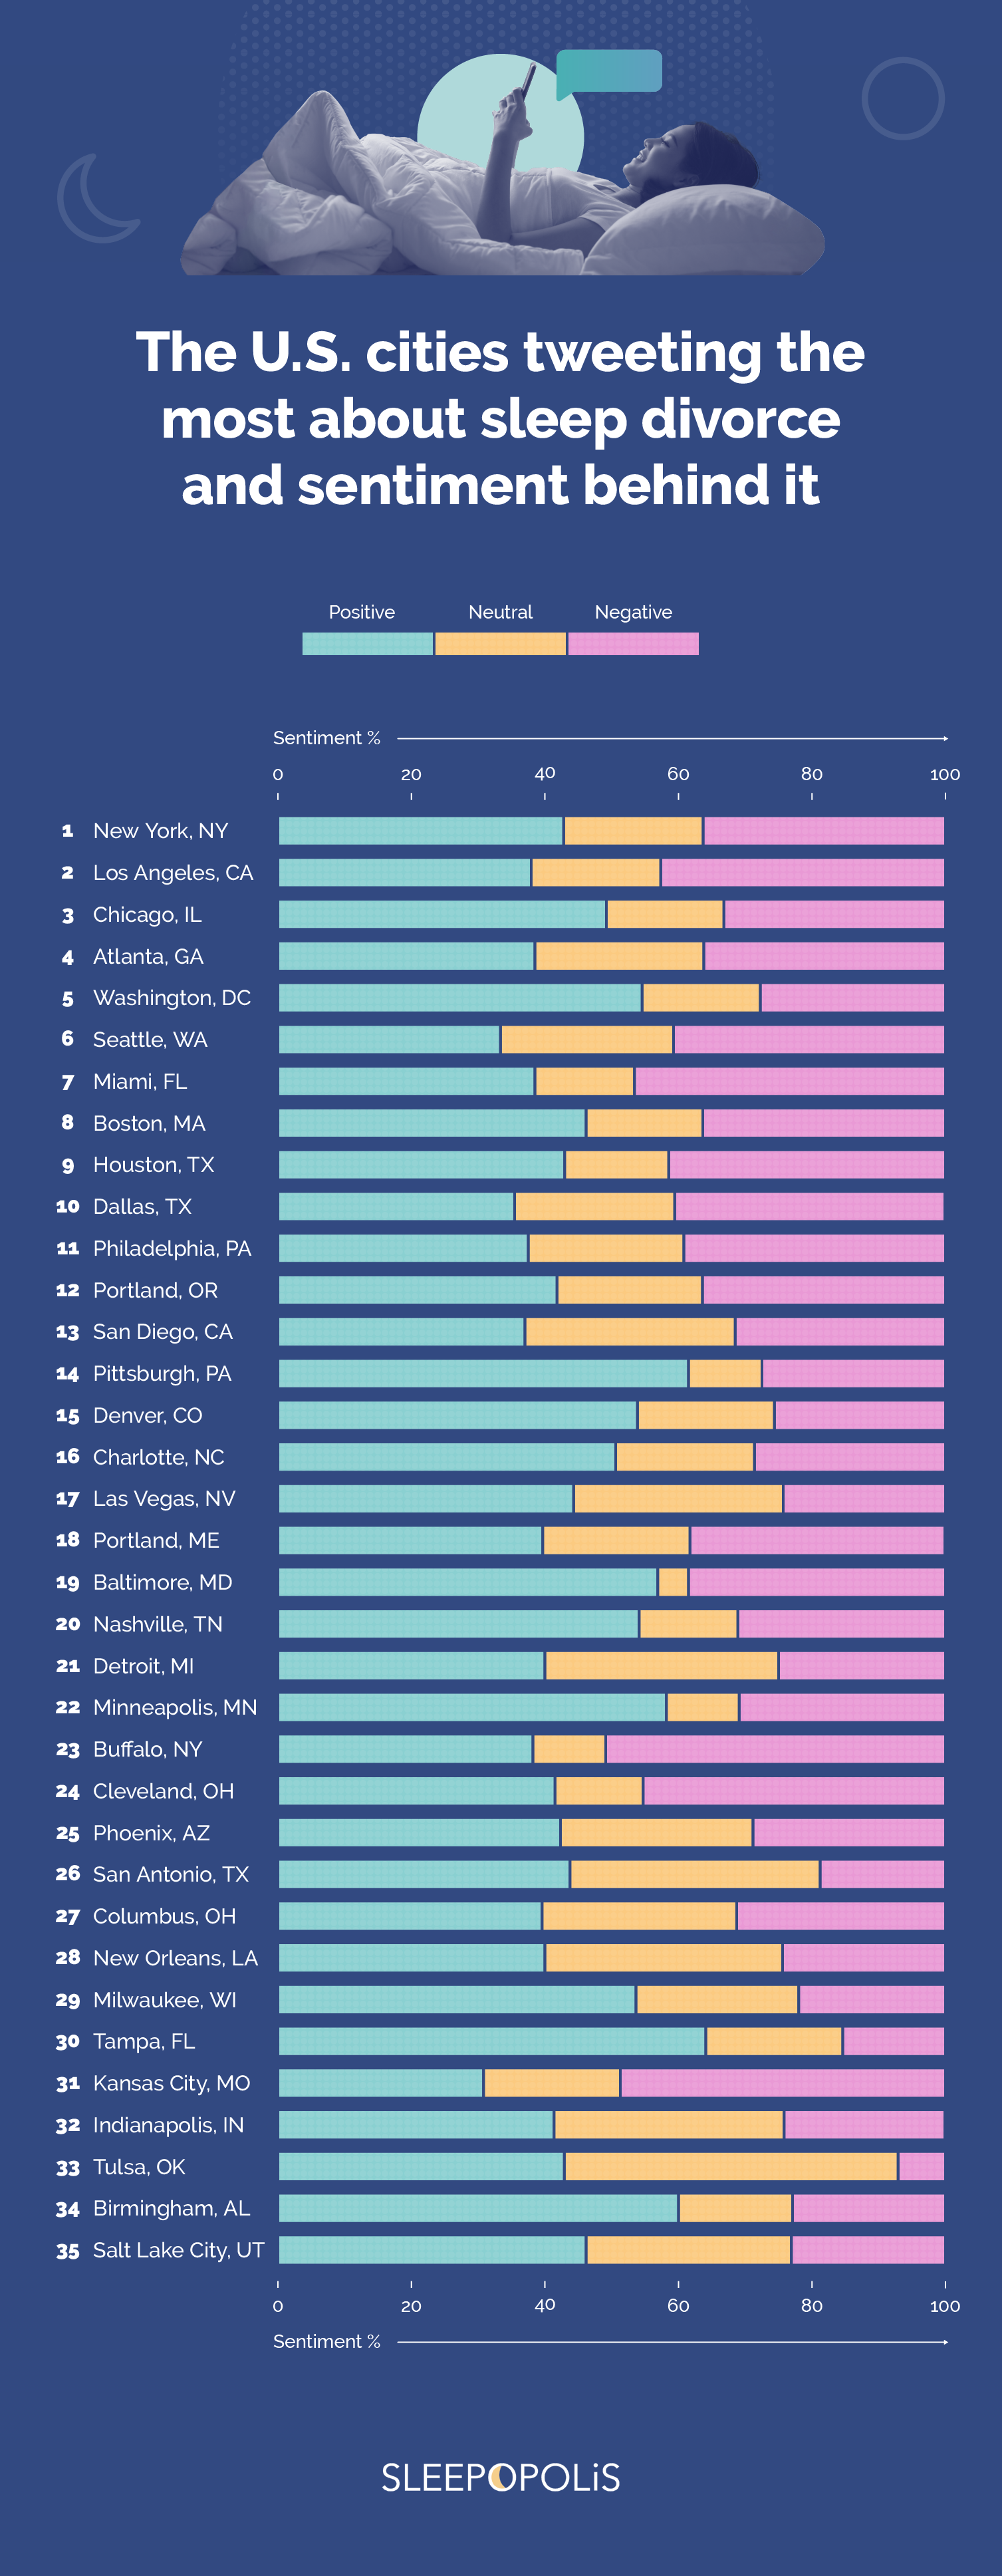 A bar chart graphic showing the U.S. cities tweeting the most about sleep divorce and the sentiment behind the tweets.